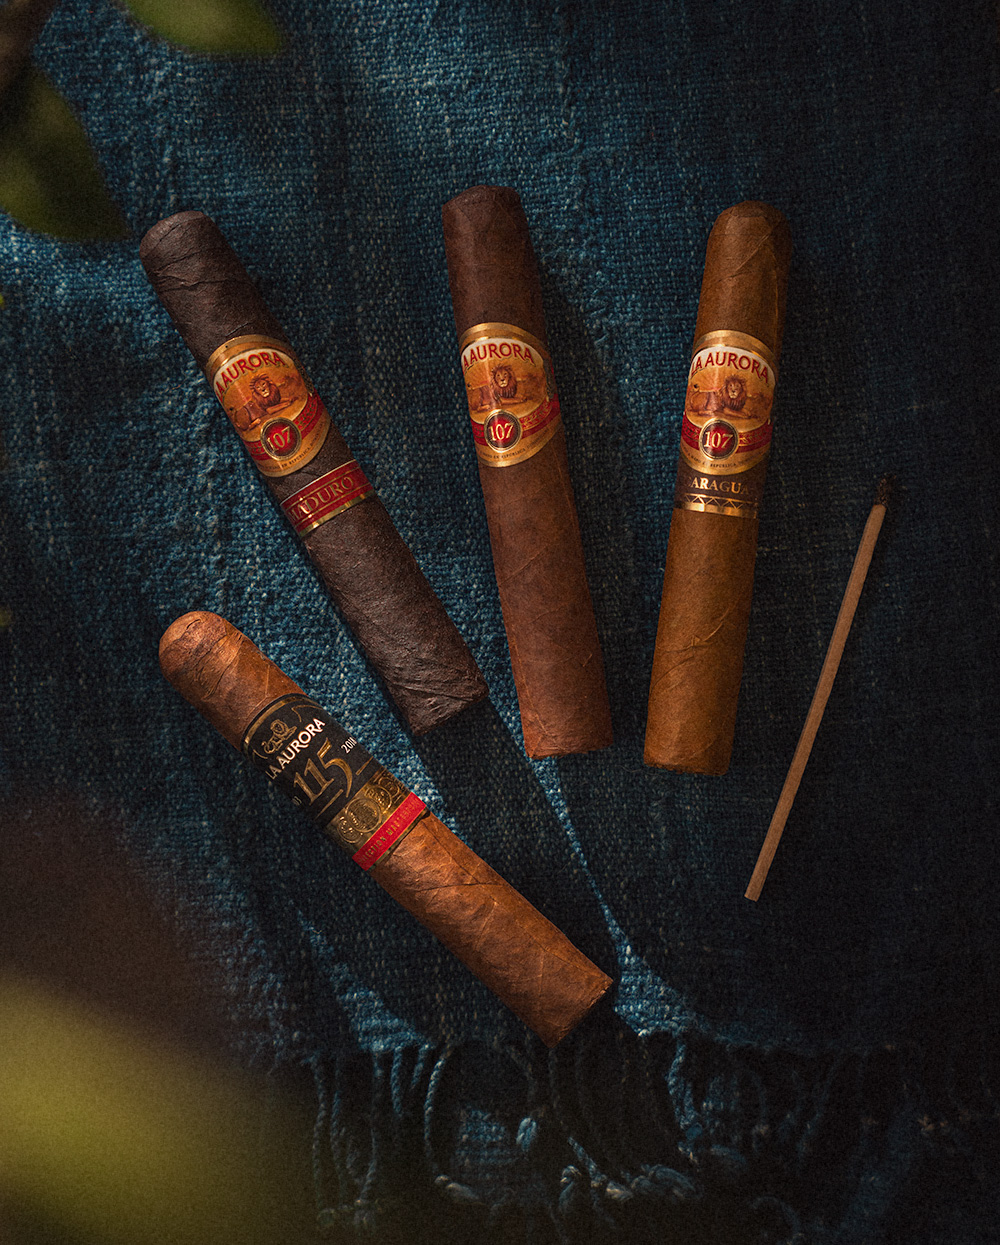 4 cigars of different colors